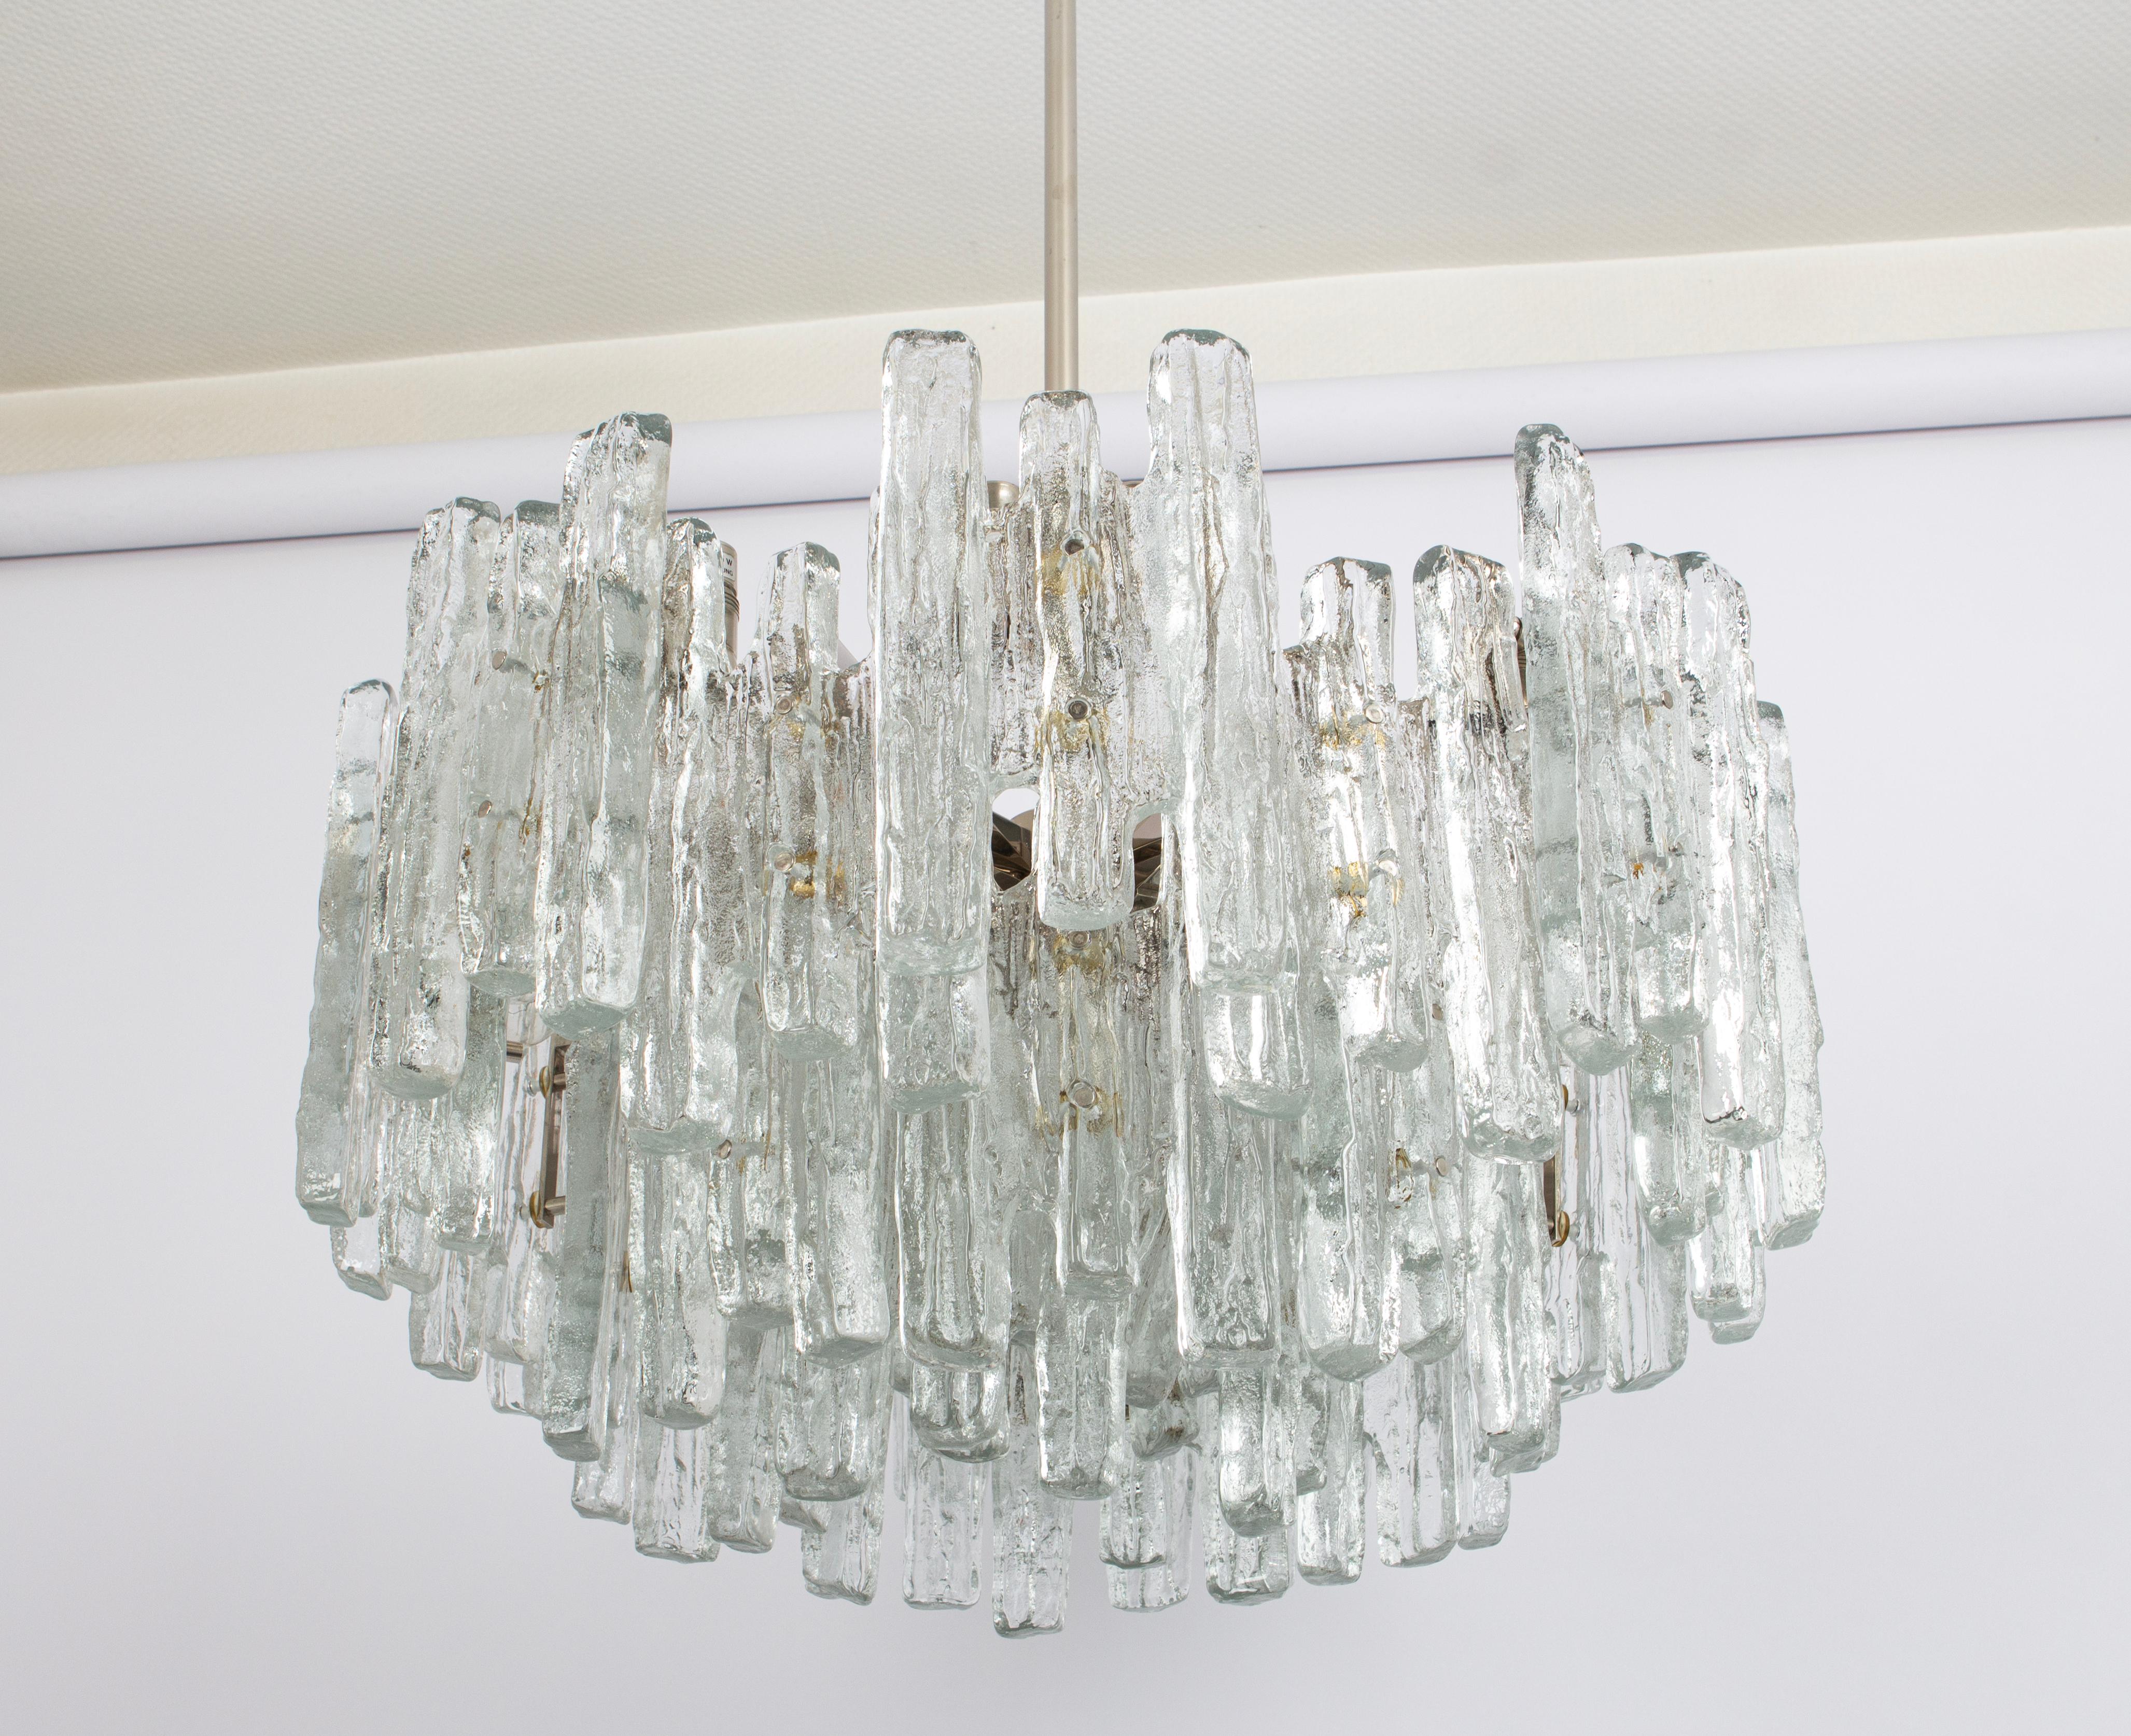 Stunning Huge Murano glass chandelier by Kalmar, 1960s
Four tiers structure gathering many structured glasses, beautifully refracting the light very heavy quality.

High quality and in very good condition. Cleaned, well-wired and ready to use. 

The